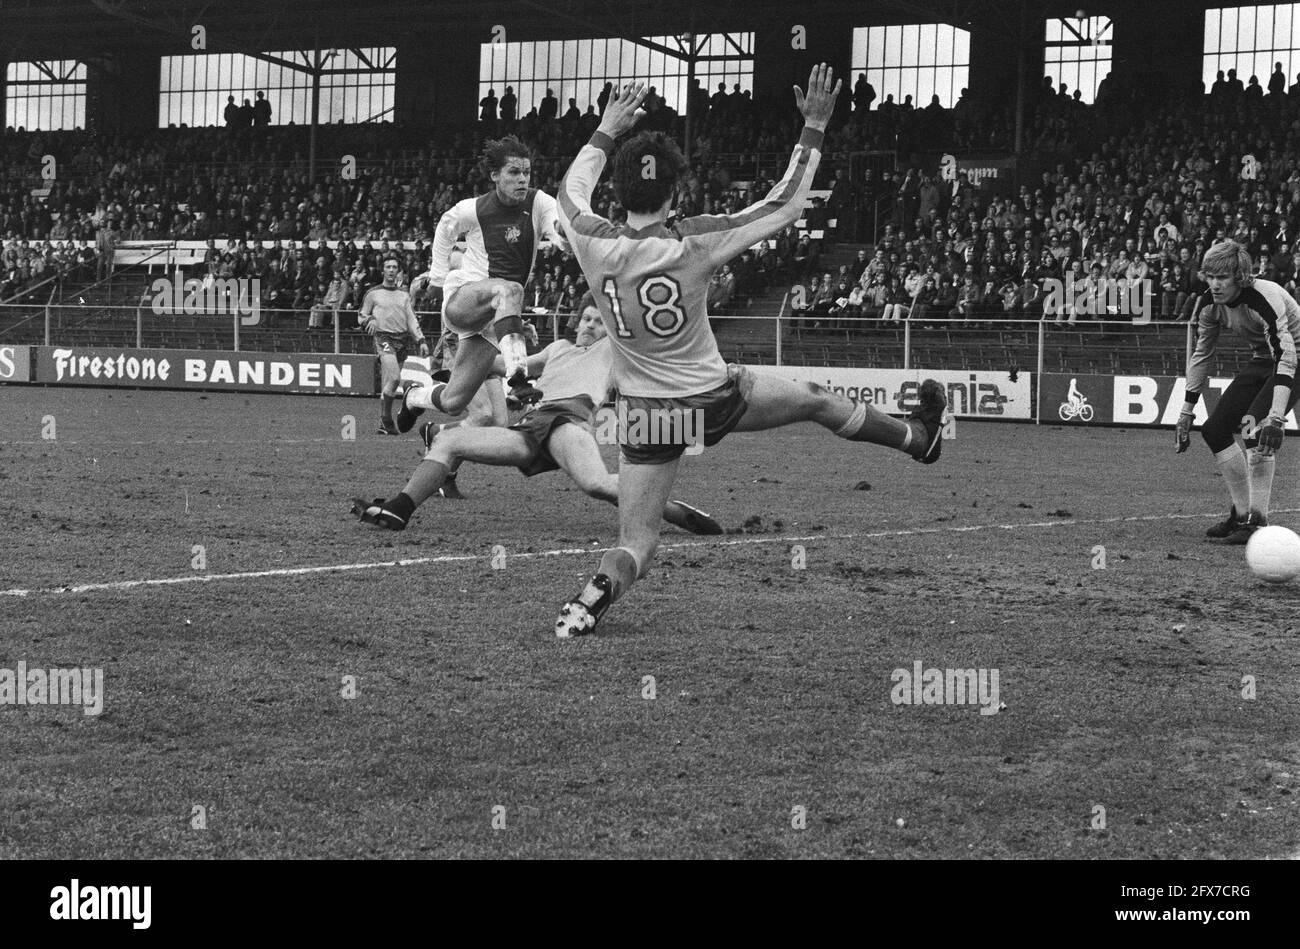 Arnesen scores 1st goal past de Kruijk (18) and goalkeeper van Breukelen (right), March 25, 1979, sports, soccer, The Netherlands, 20th century press agency photo, news to remember, documentary, historic photography 1945-1990, visual stories, human history of the Twentieth Century, capturing moments in time Stock Photo